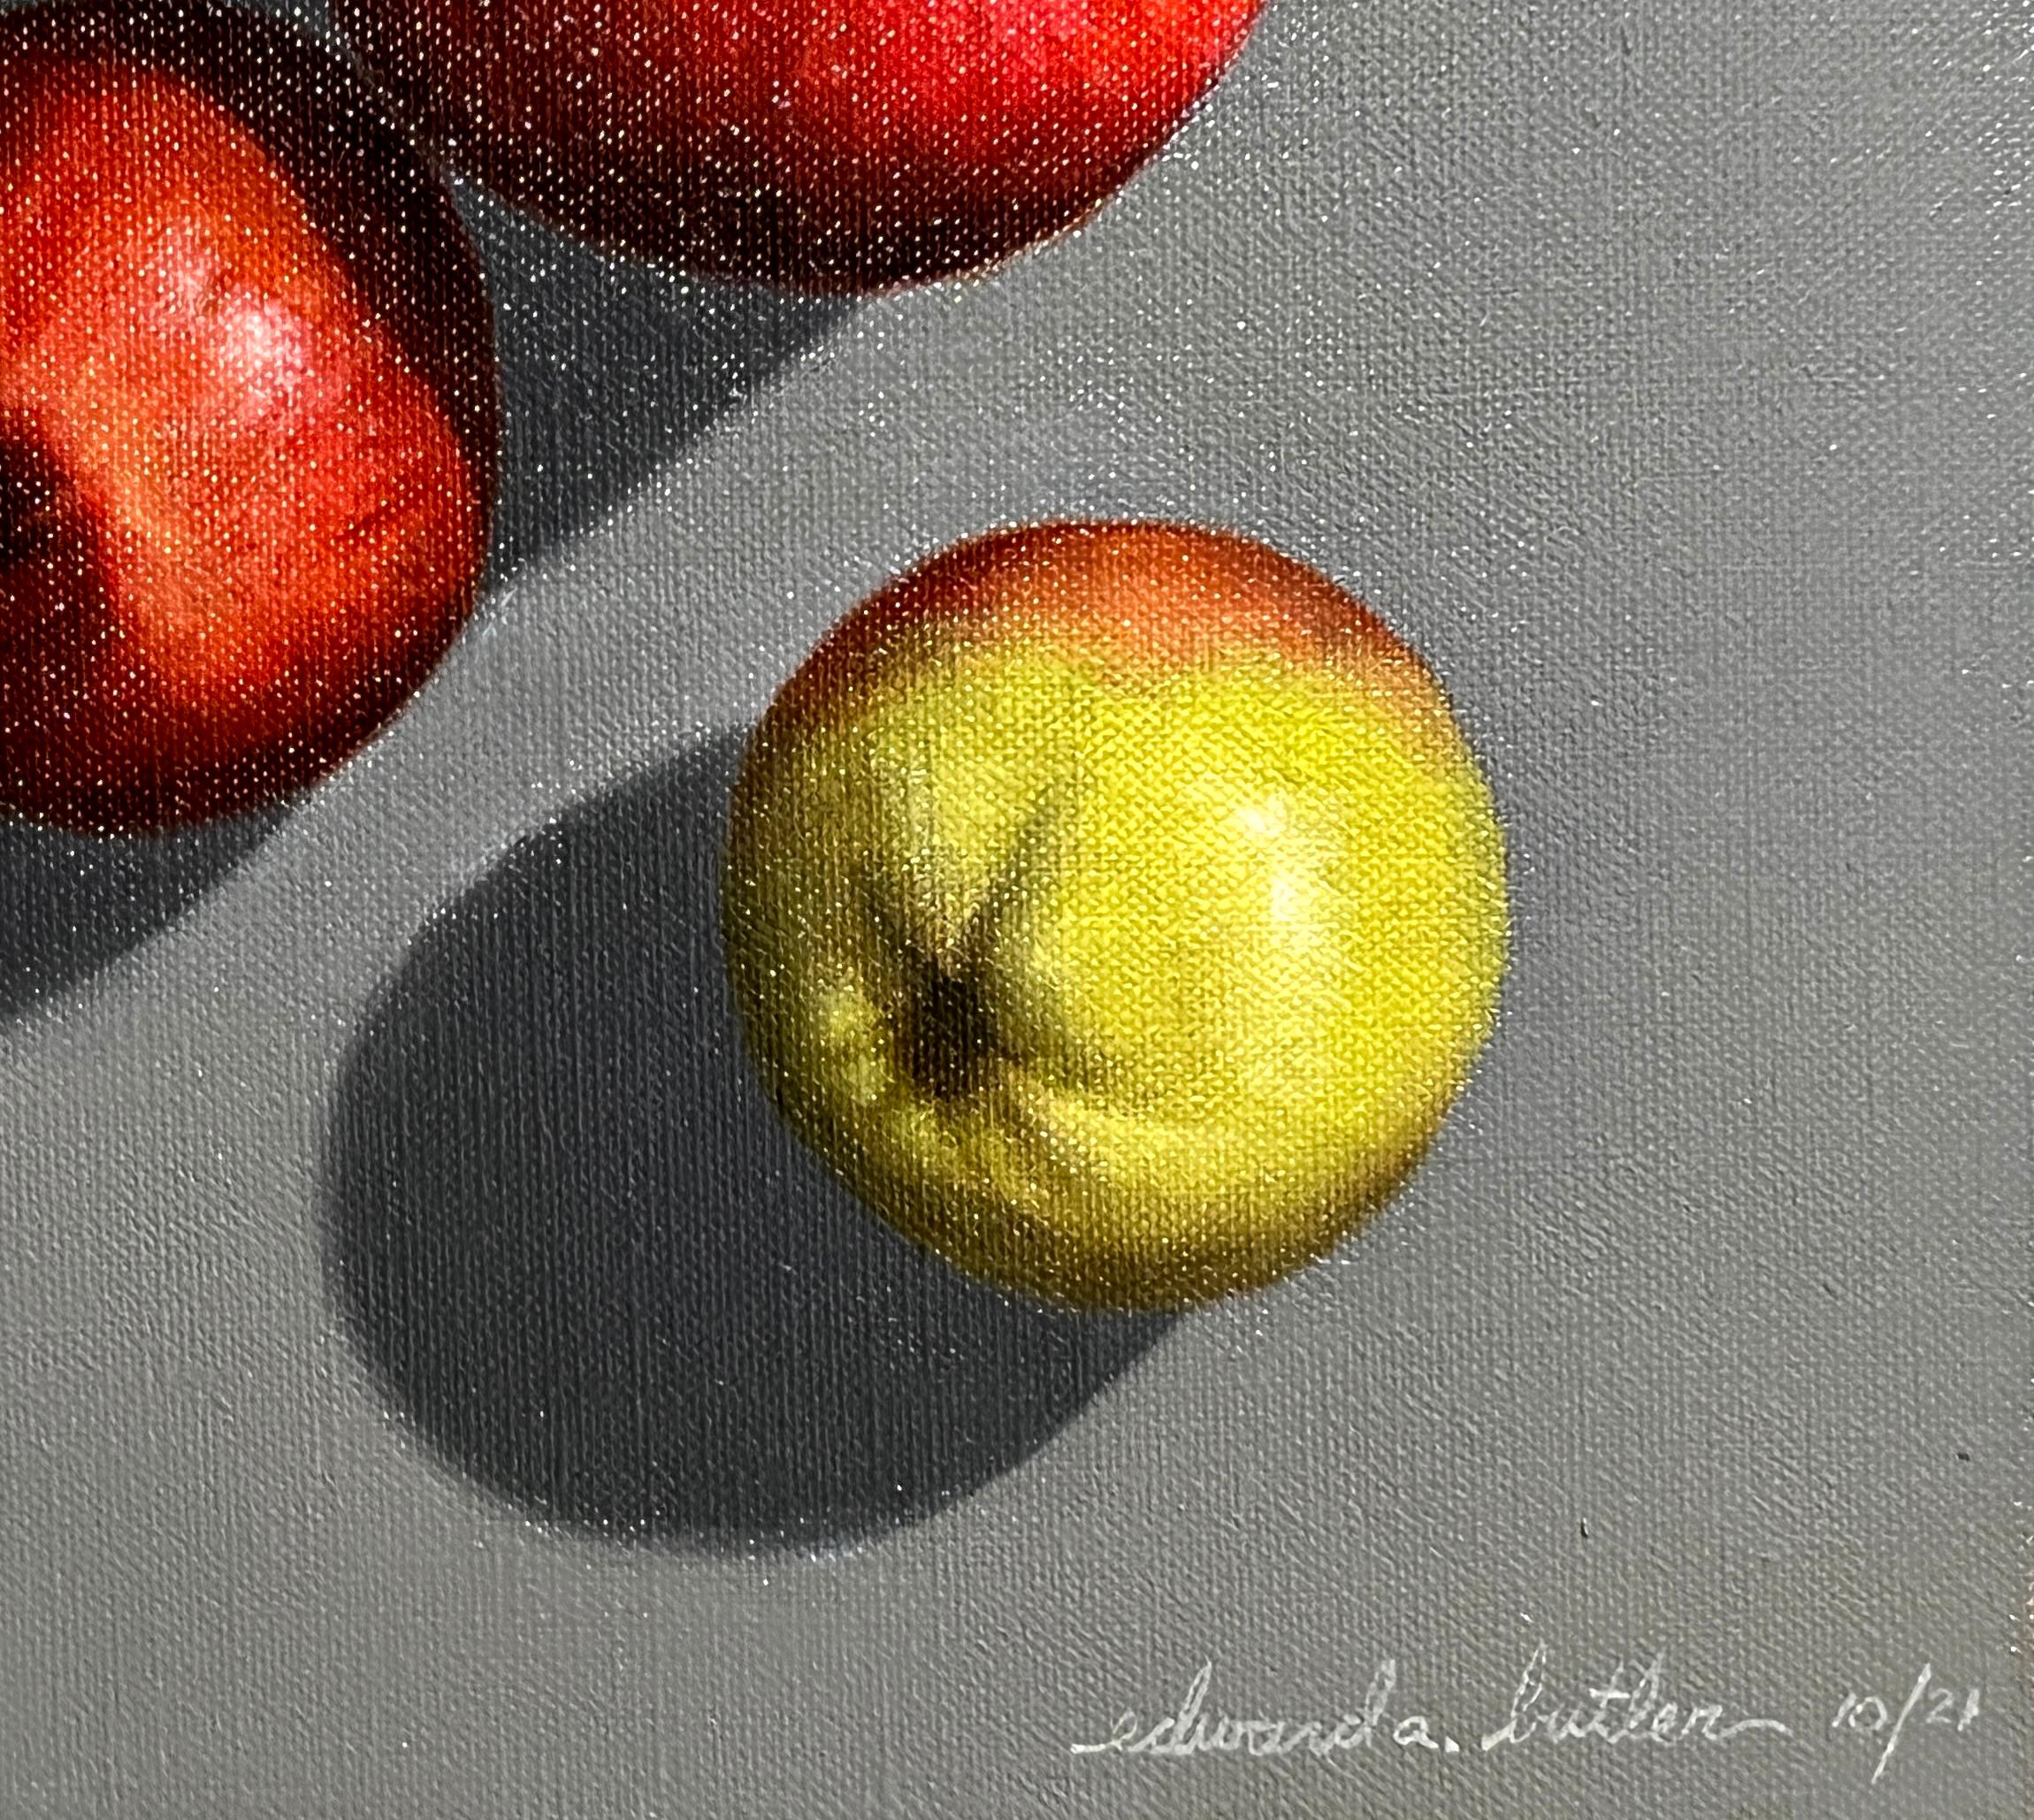 ASSORTED APPLES - Contemporary Still Life / Realism / Photorealism - Gray Still-Life Painting by Edward A. Butler